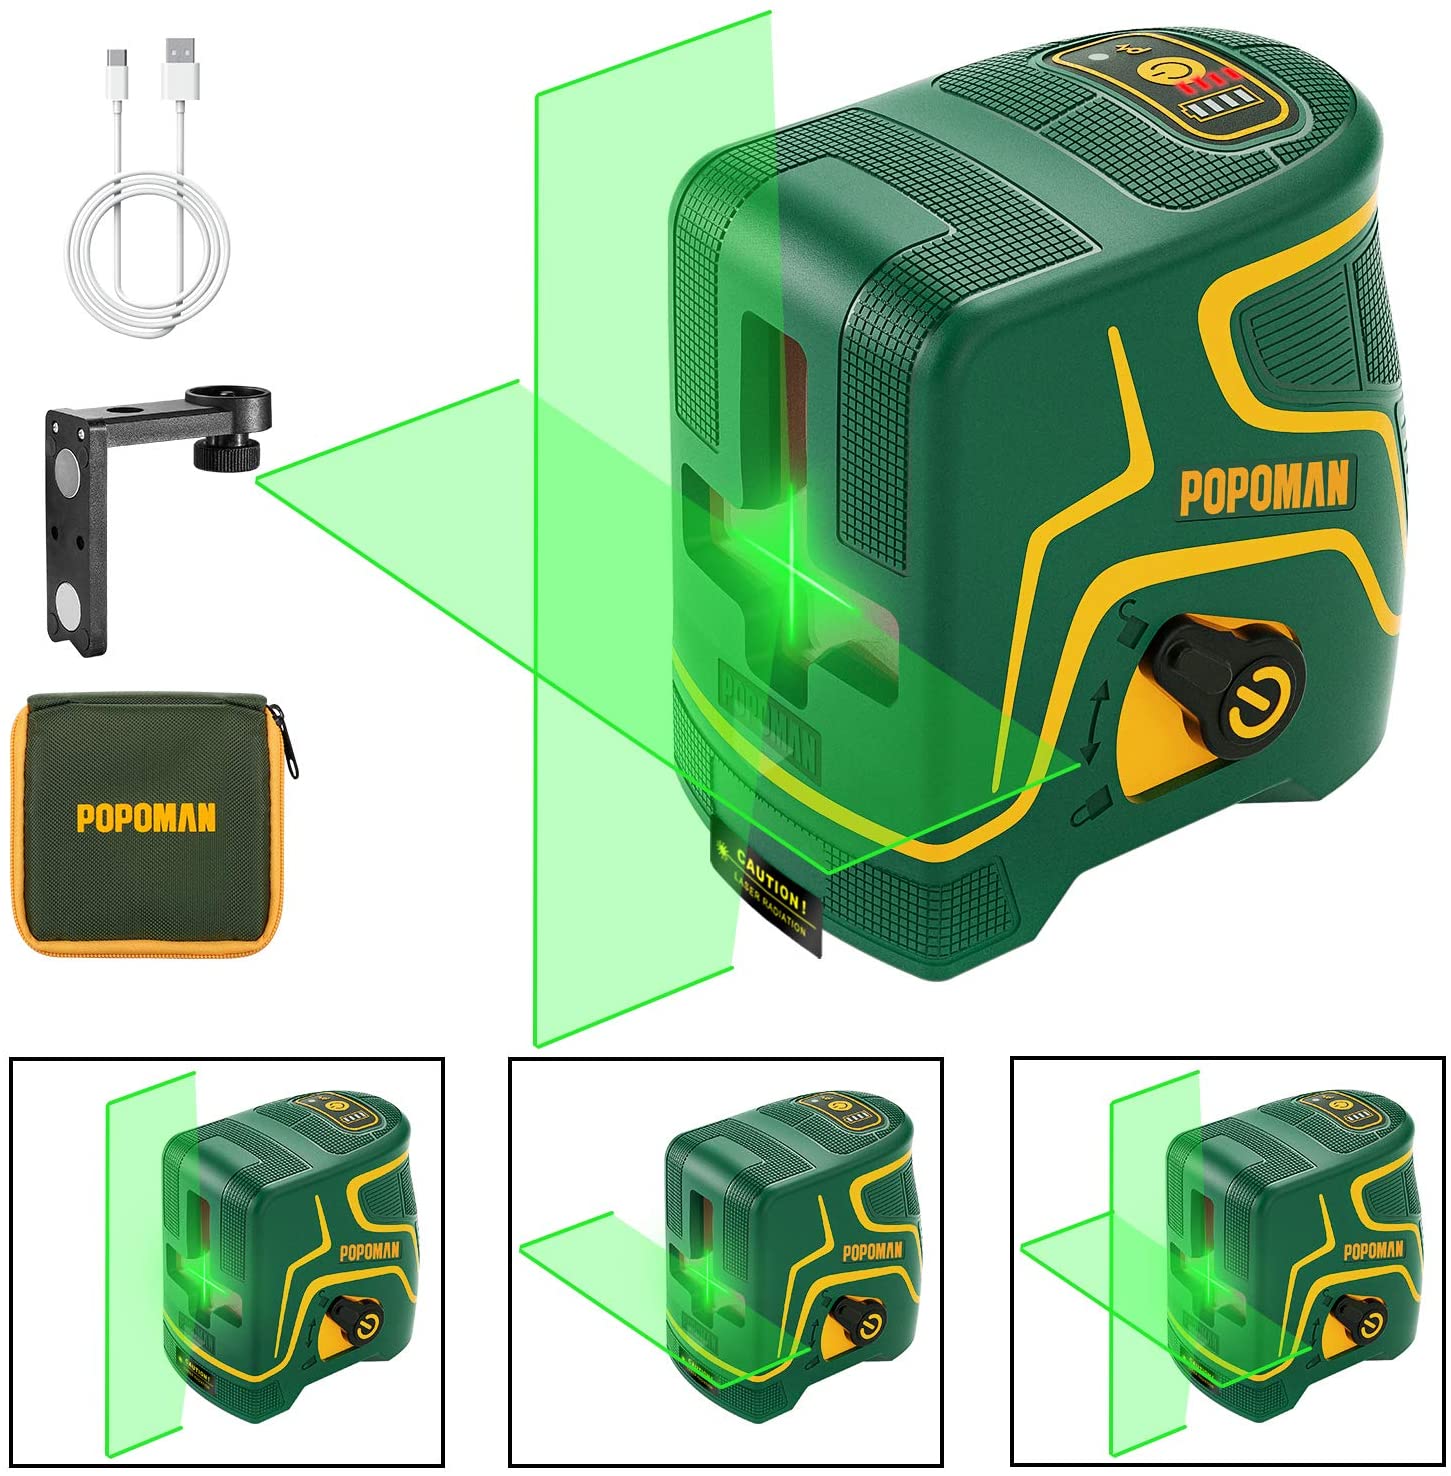 Laser Level 3D & 3 x 360°, Line Laser Green POPOMAN, USB Rechargeable, Self  Leveling and Pulse Mode, Magnetic Pivoting Base, Auxiliary Supporting  Bracket, Carrying Case Include - MTM350B 